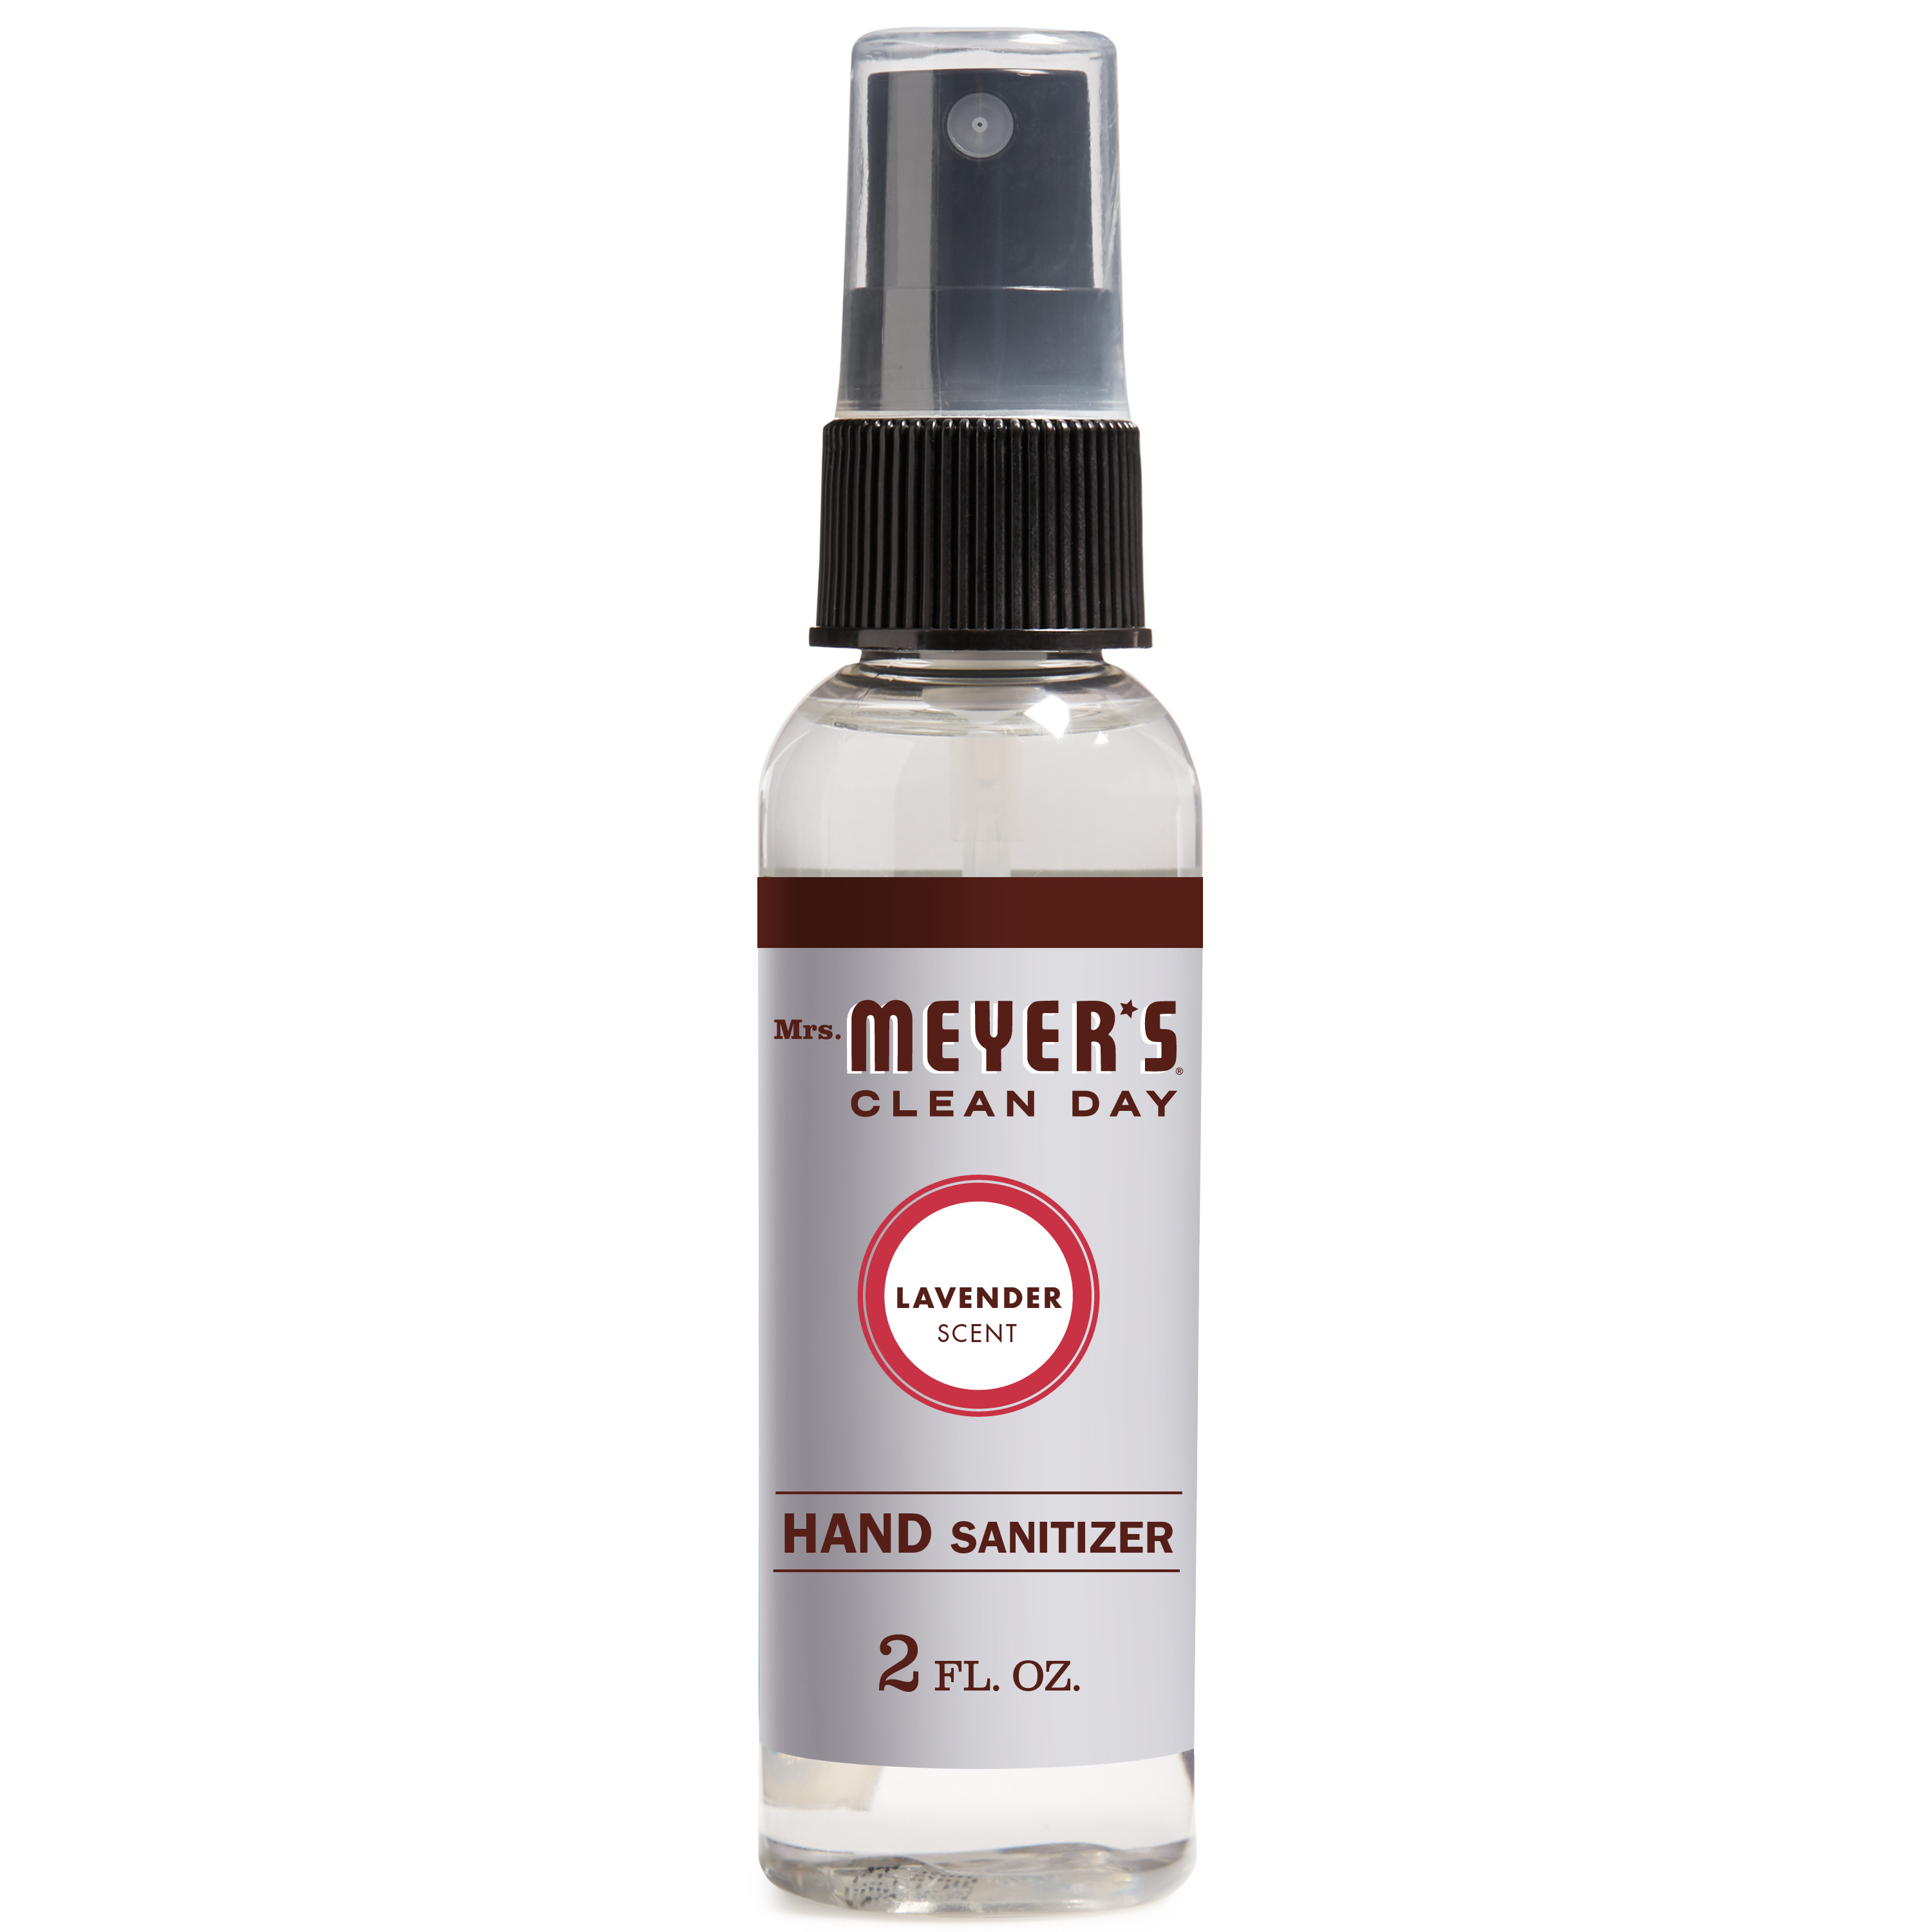 Mrs. Meyer's Clean Day Hand Sanitizer, Removes 99.9% of Bacteria on Skin, Lavender Scent, 2 Ounce Spray Bottle - image 1 of 7